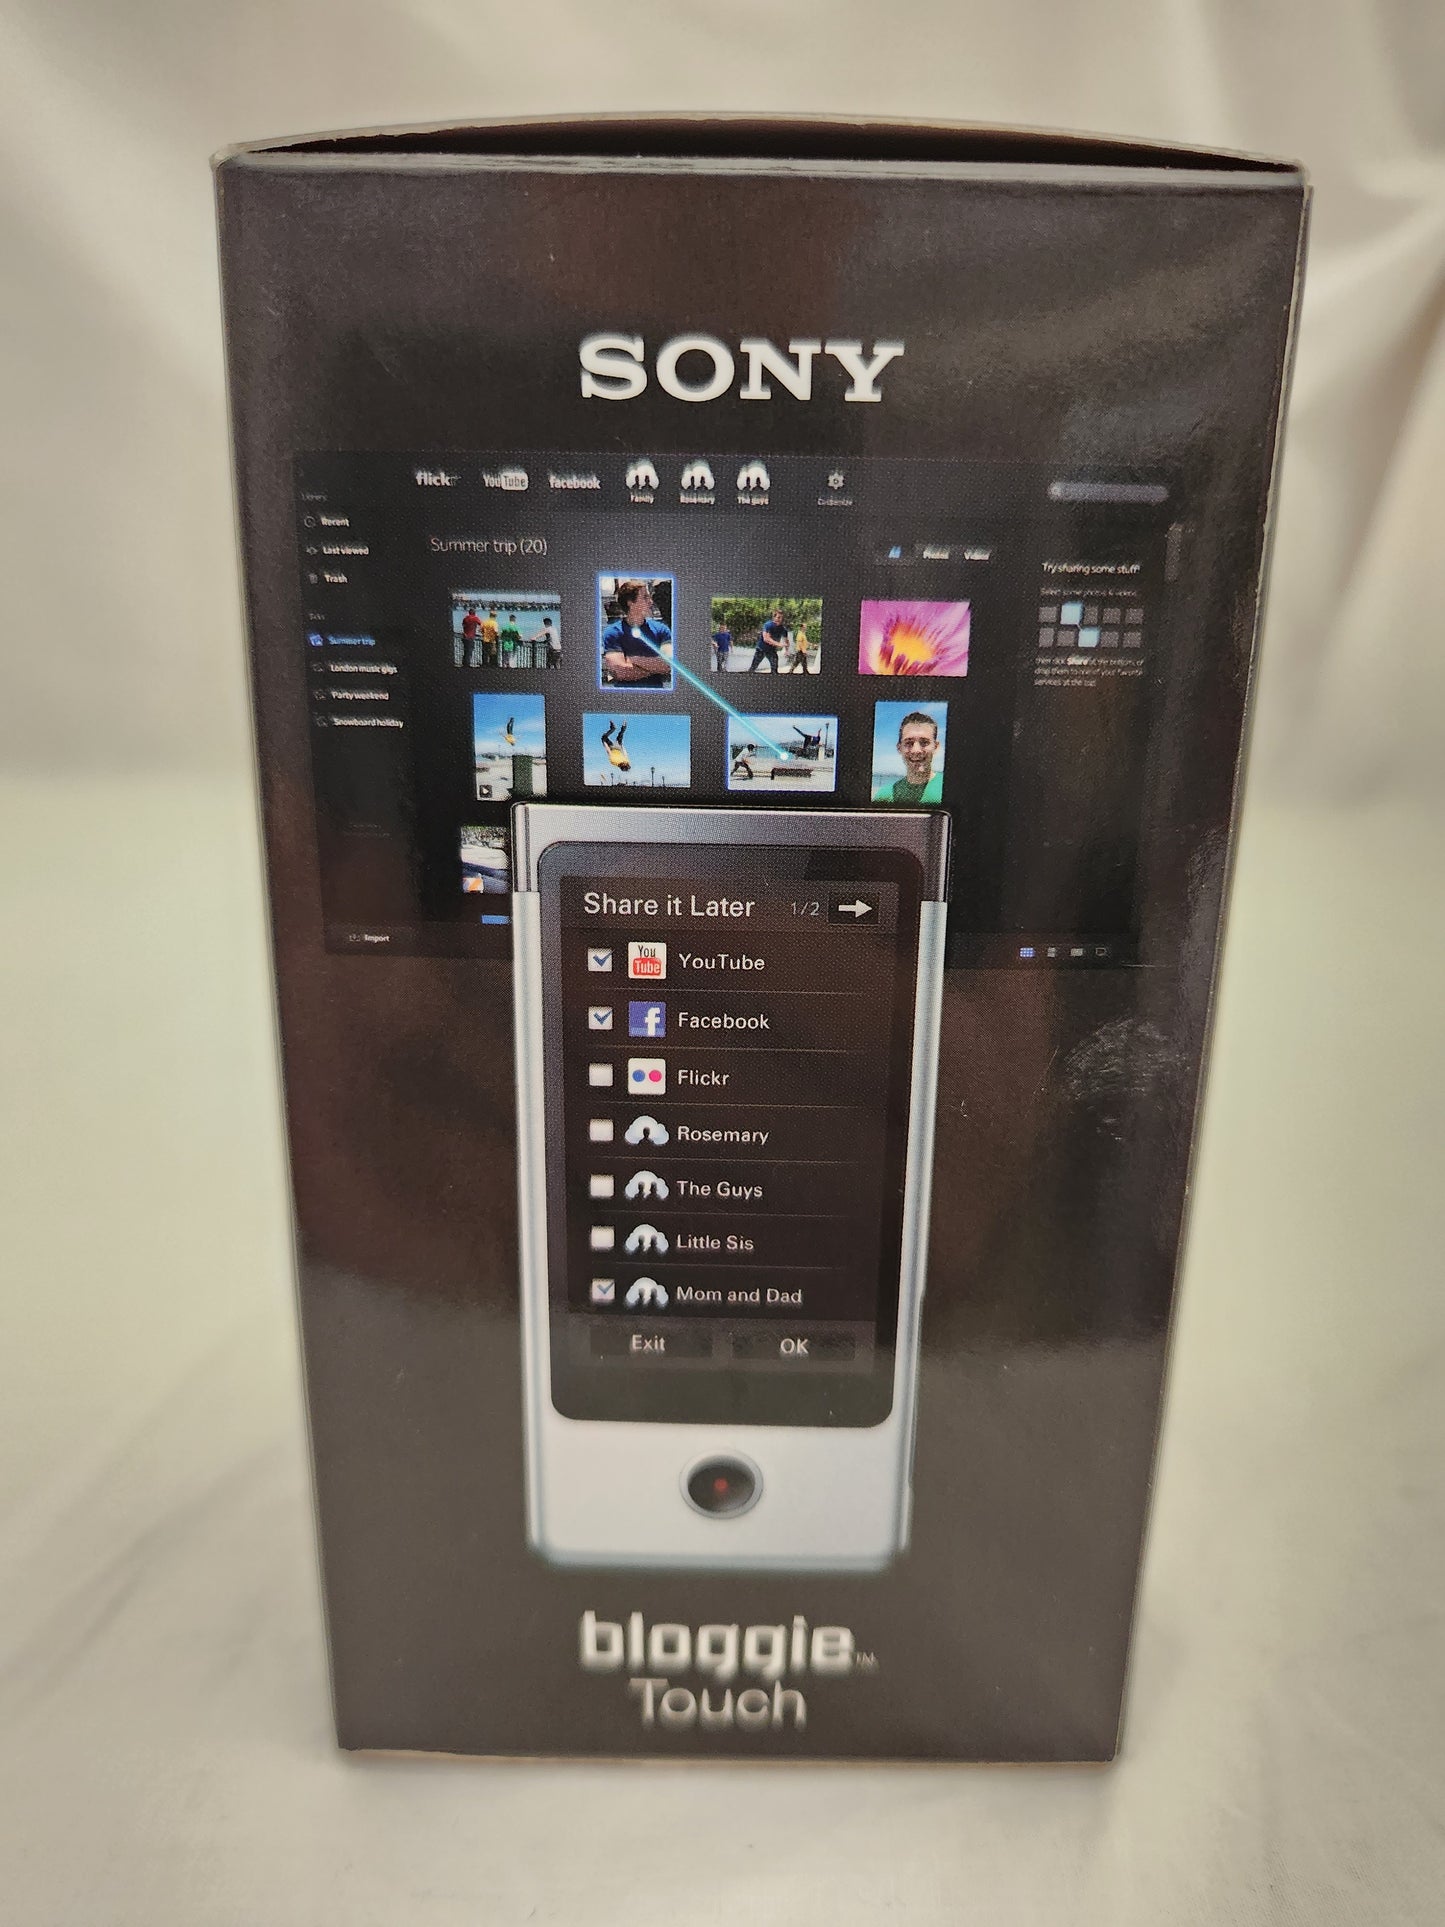 Sony MHS-TS10 Silver Bloggie Touch Mobile HD Snap Camera - 4 GB of Memory